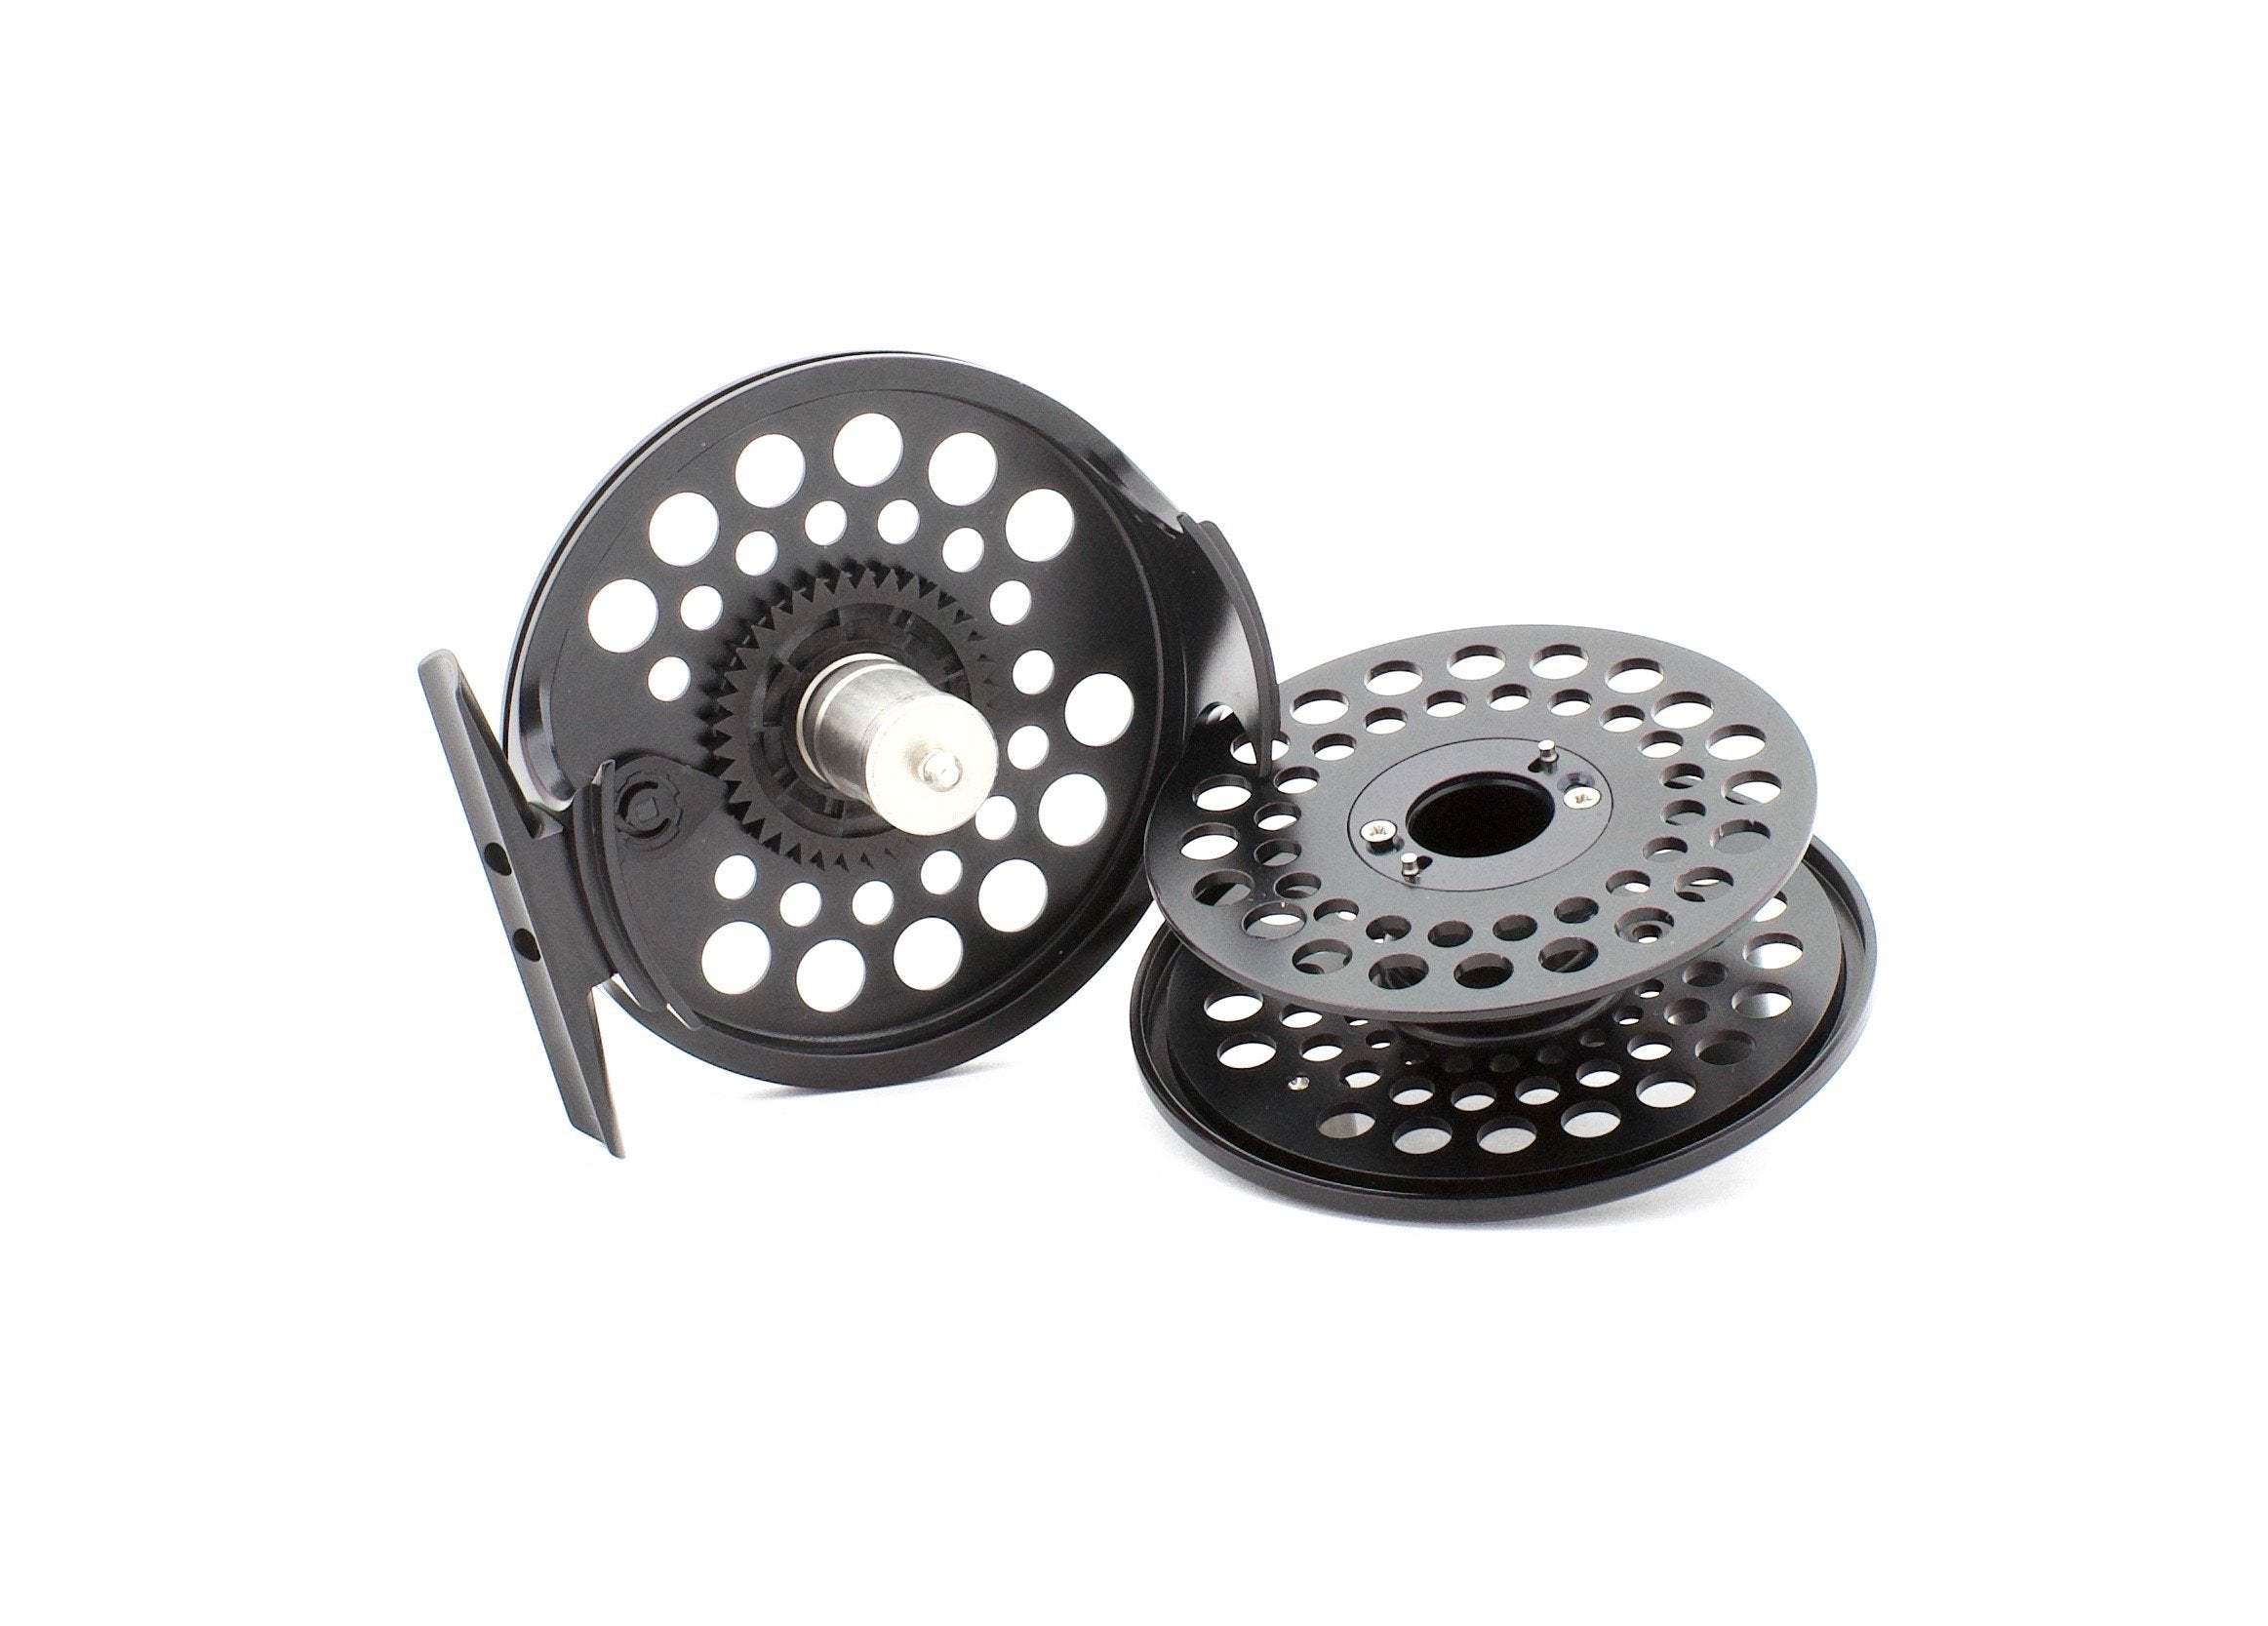 Ross Reel Gunnison G-4 Fly Reel Fishing /AS3552/16 – Contino